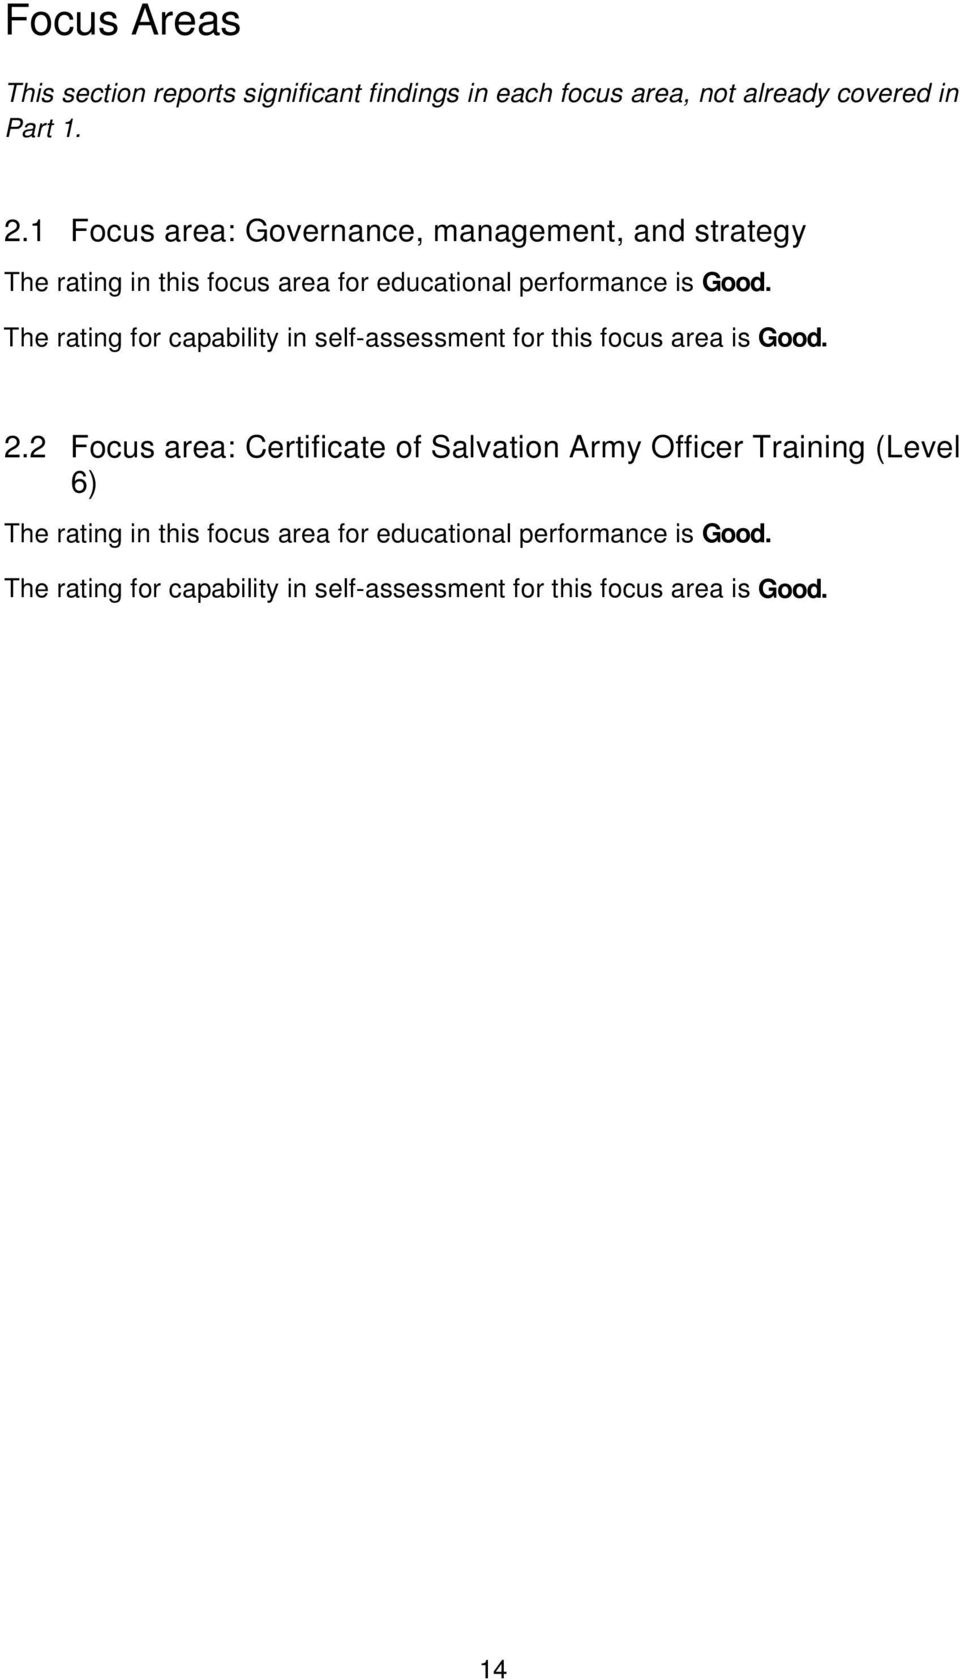 The rating for capability in self-assessment for this focus area is Good. 2.